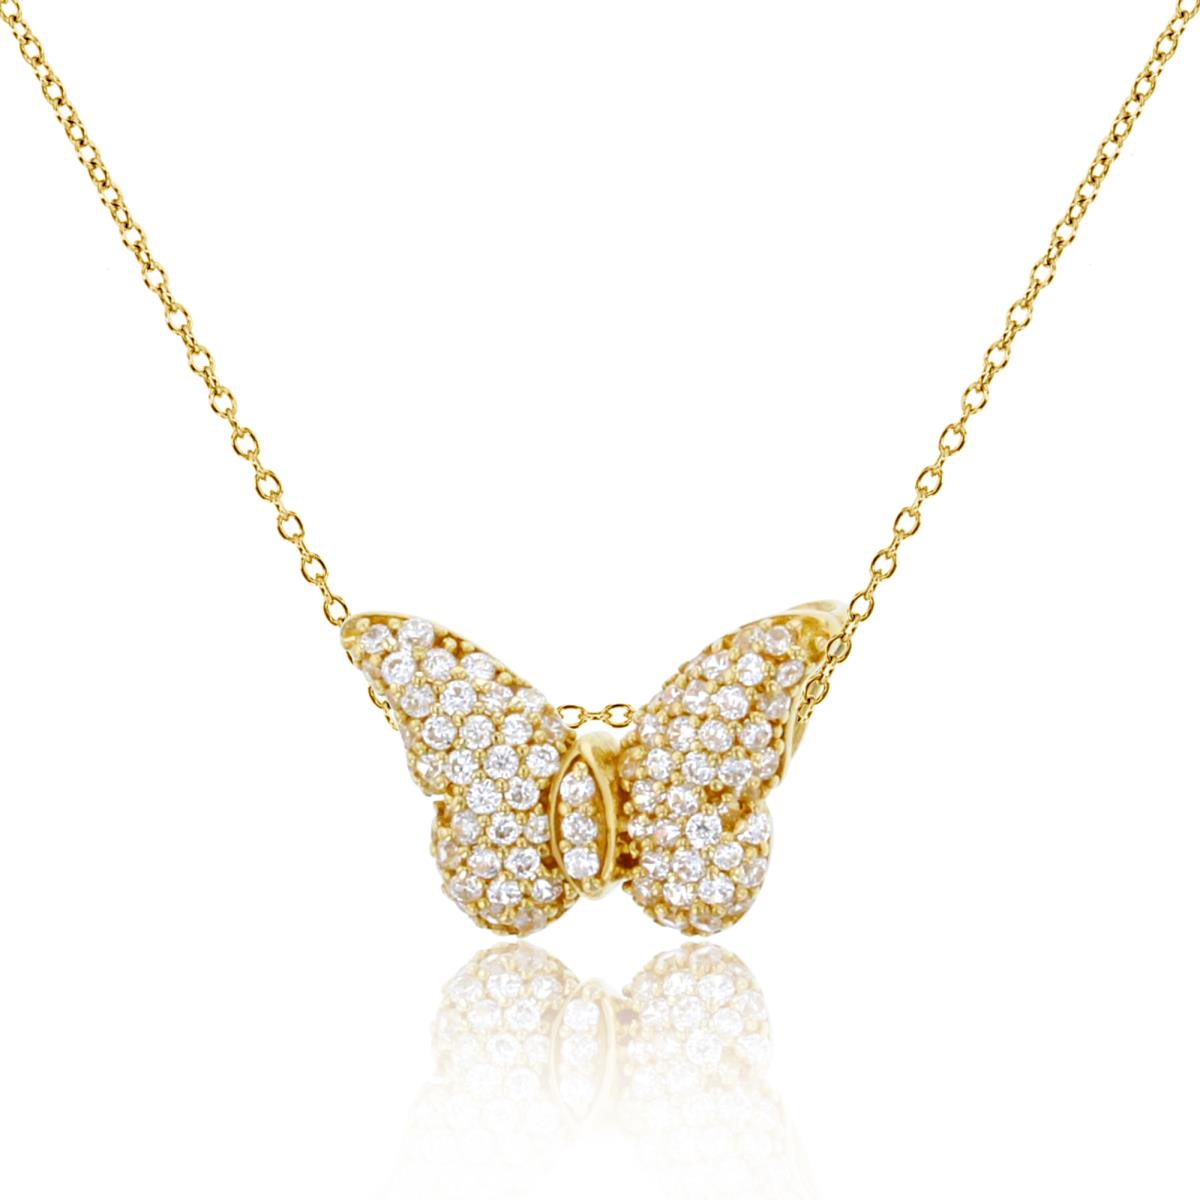 14K Yellow Gold 0.324 Cttw Diamond Polished Butterfly18" Necklace